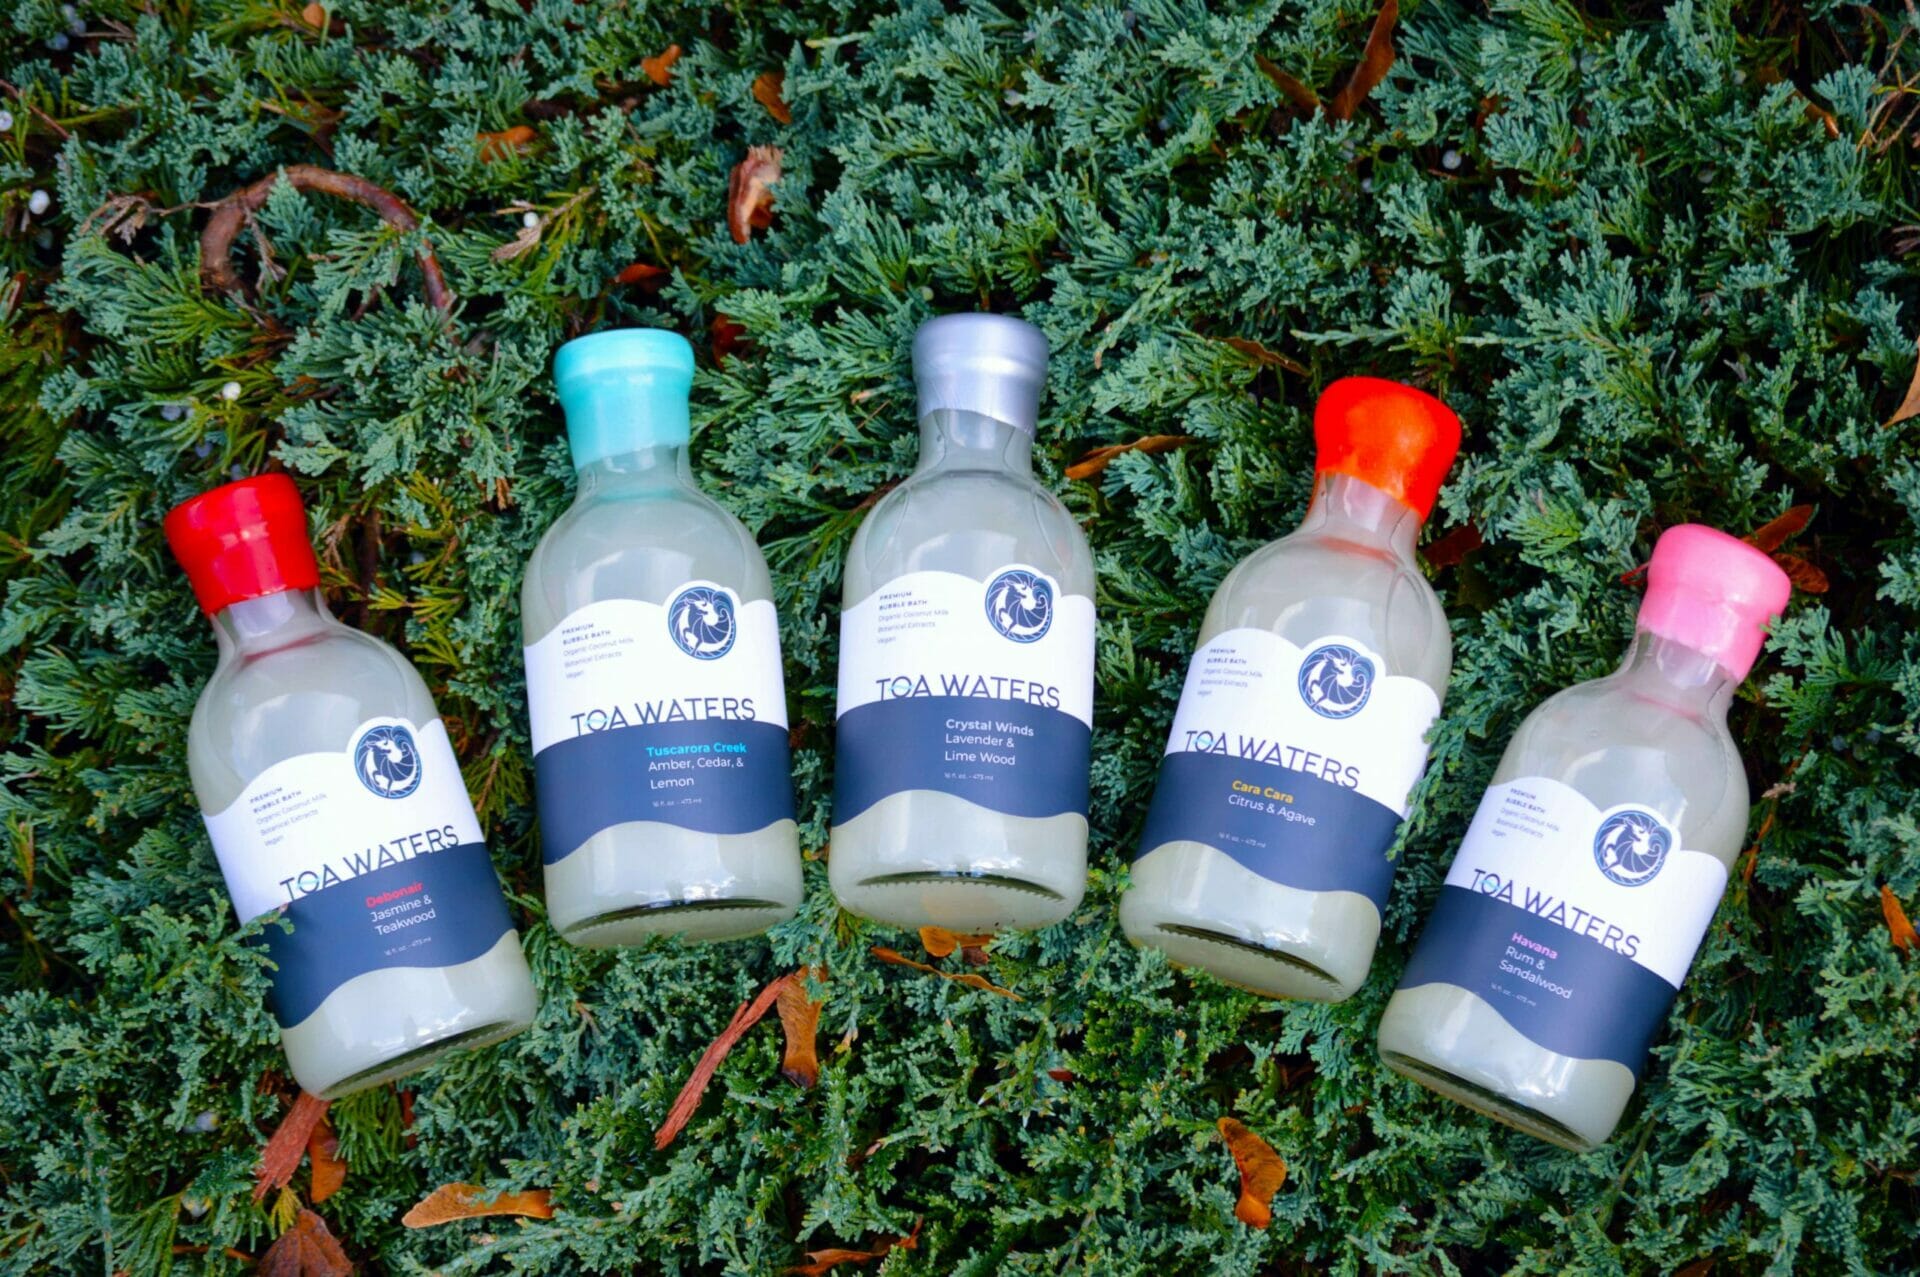 The Rejuvenation bubble bath Collection by TOA Waters